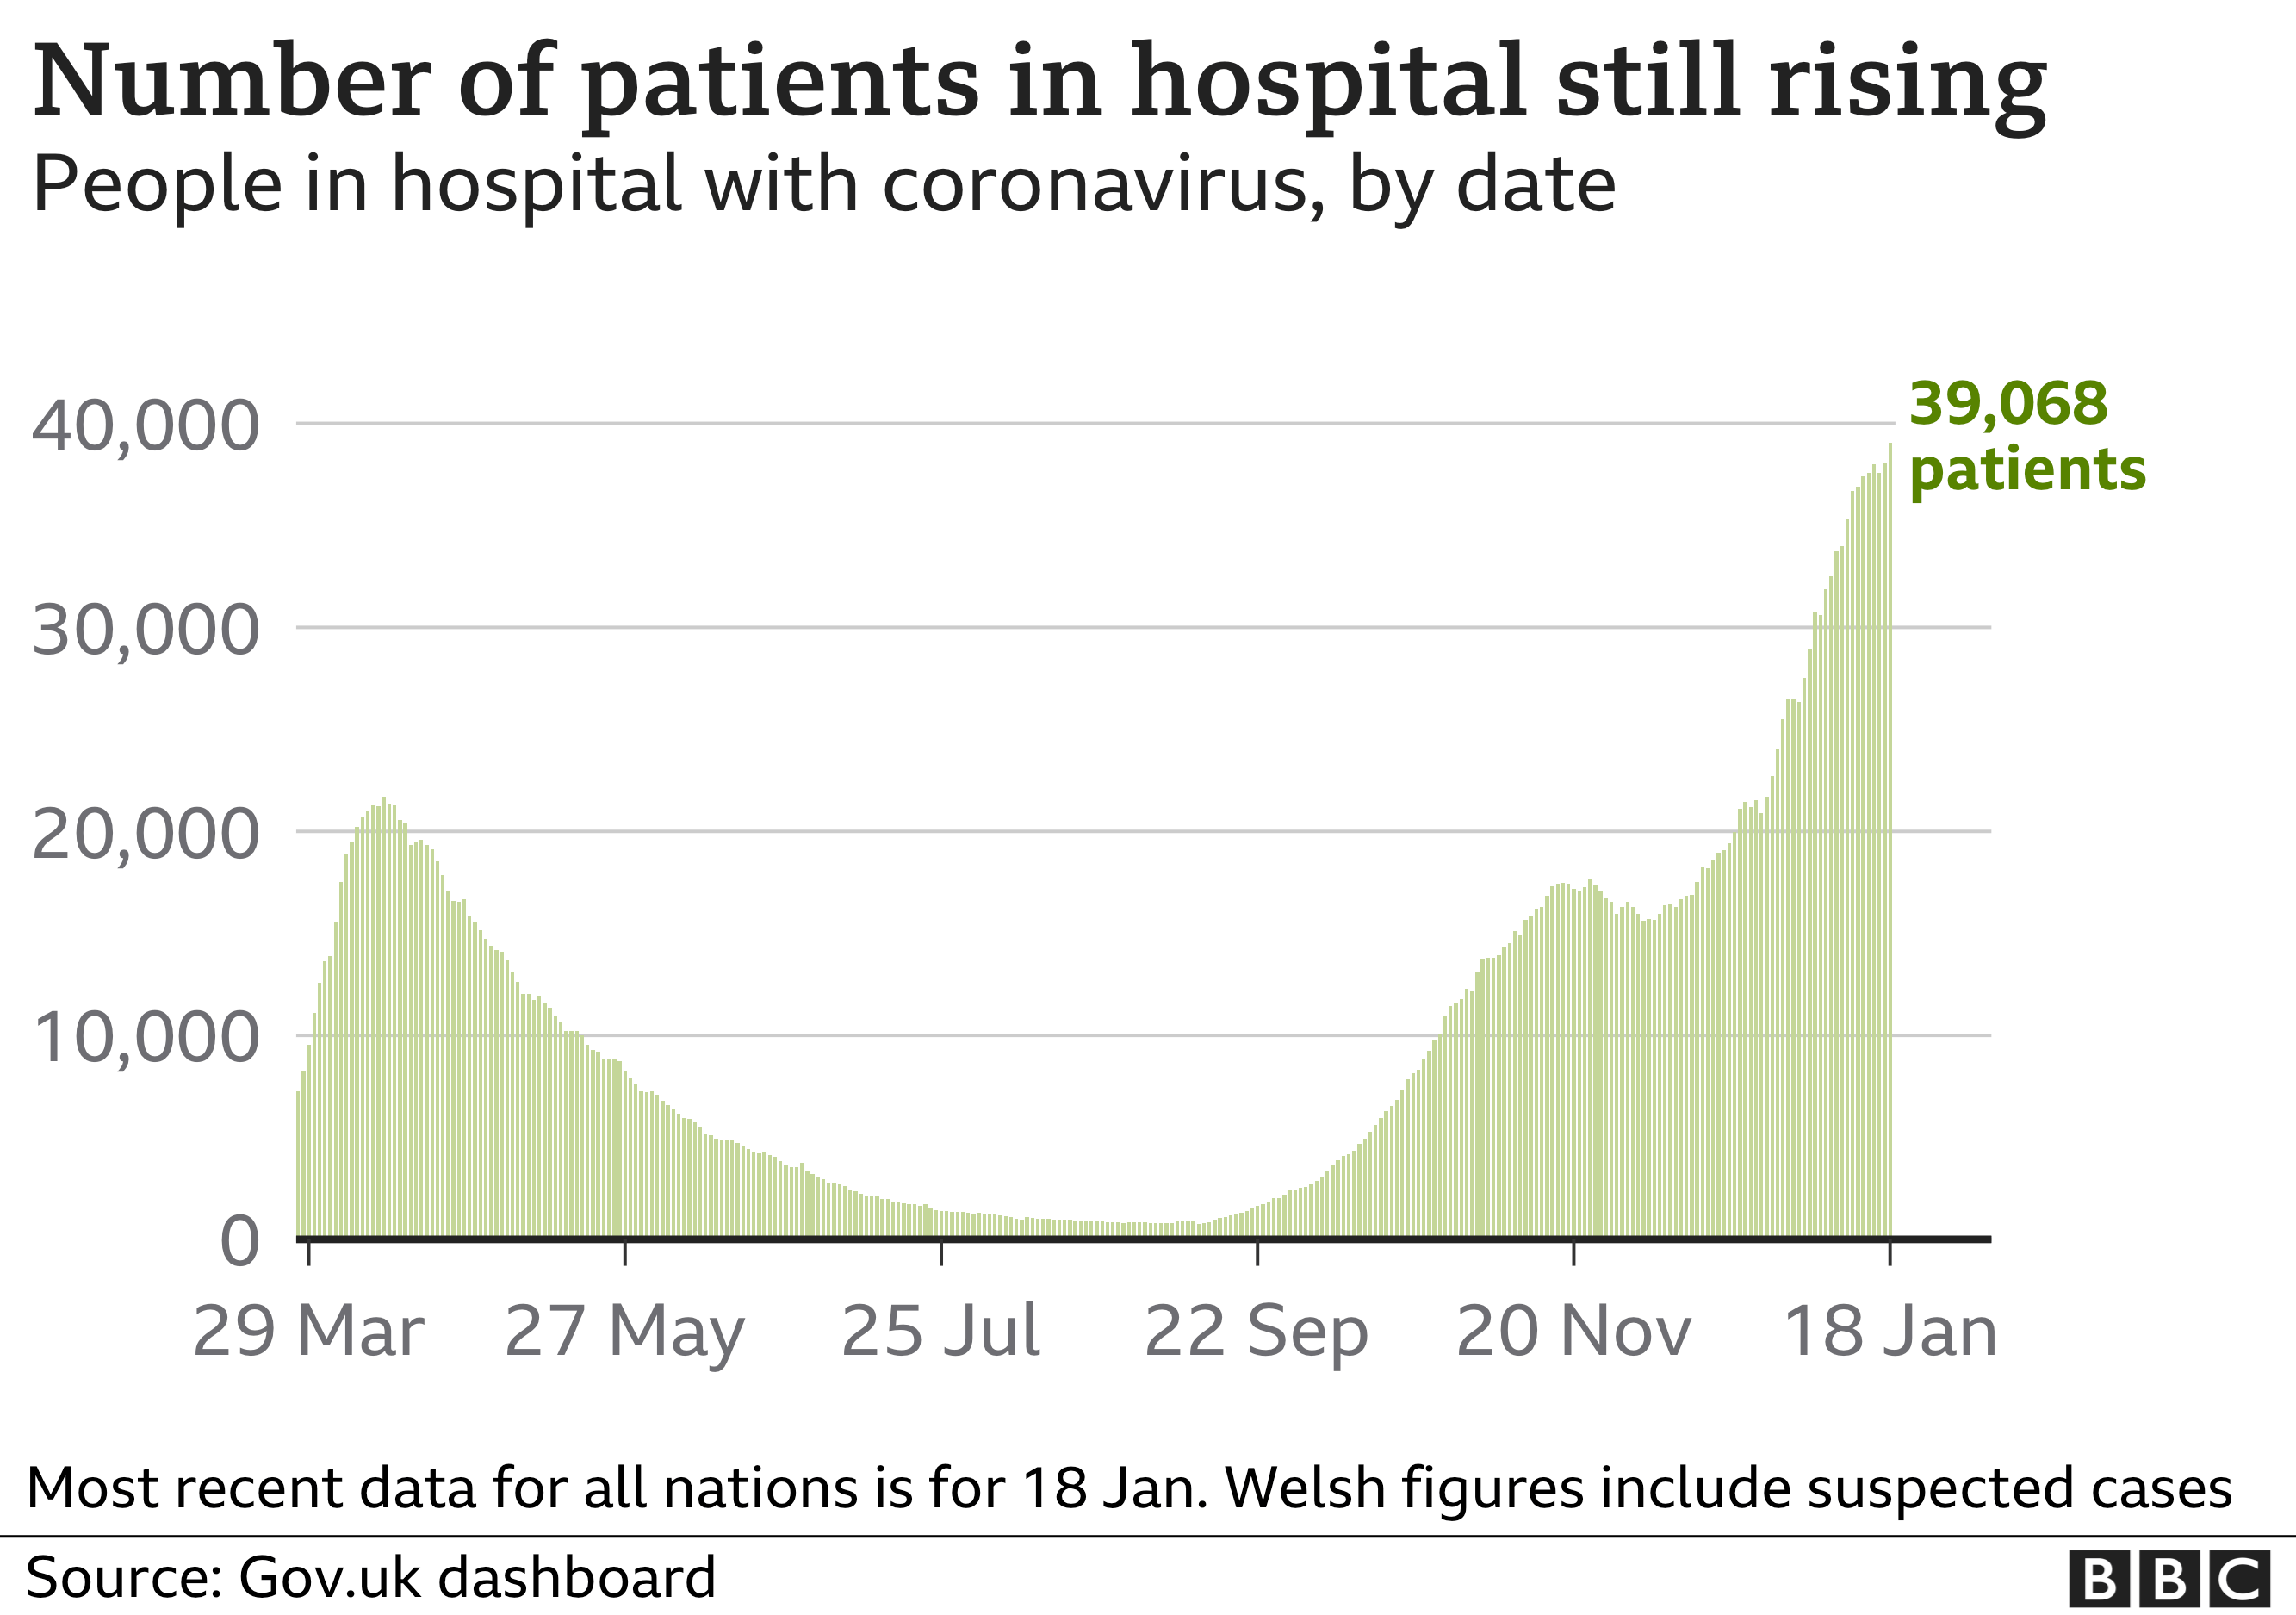 Graph showing number of patients in hospitals in the UK is still rising